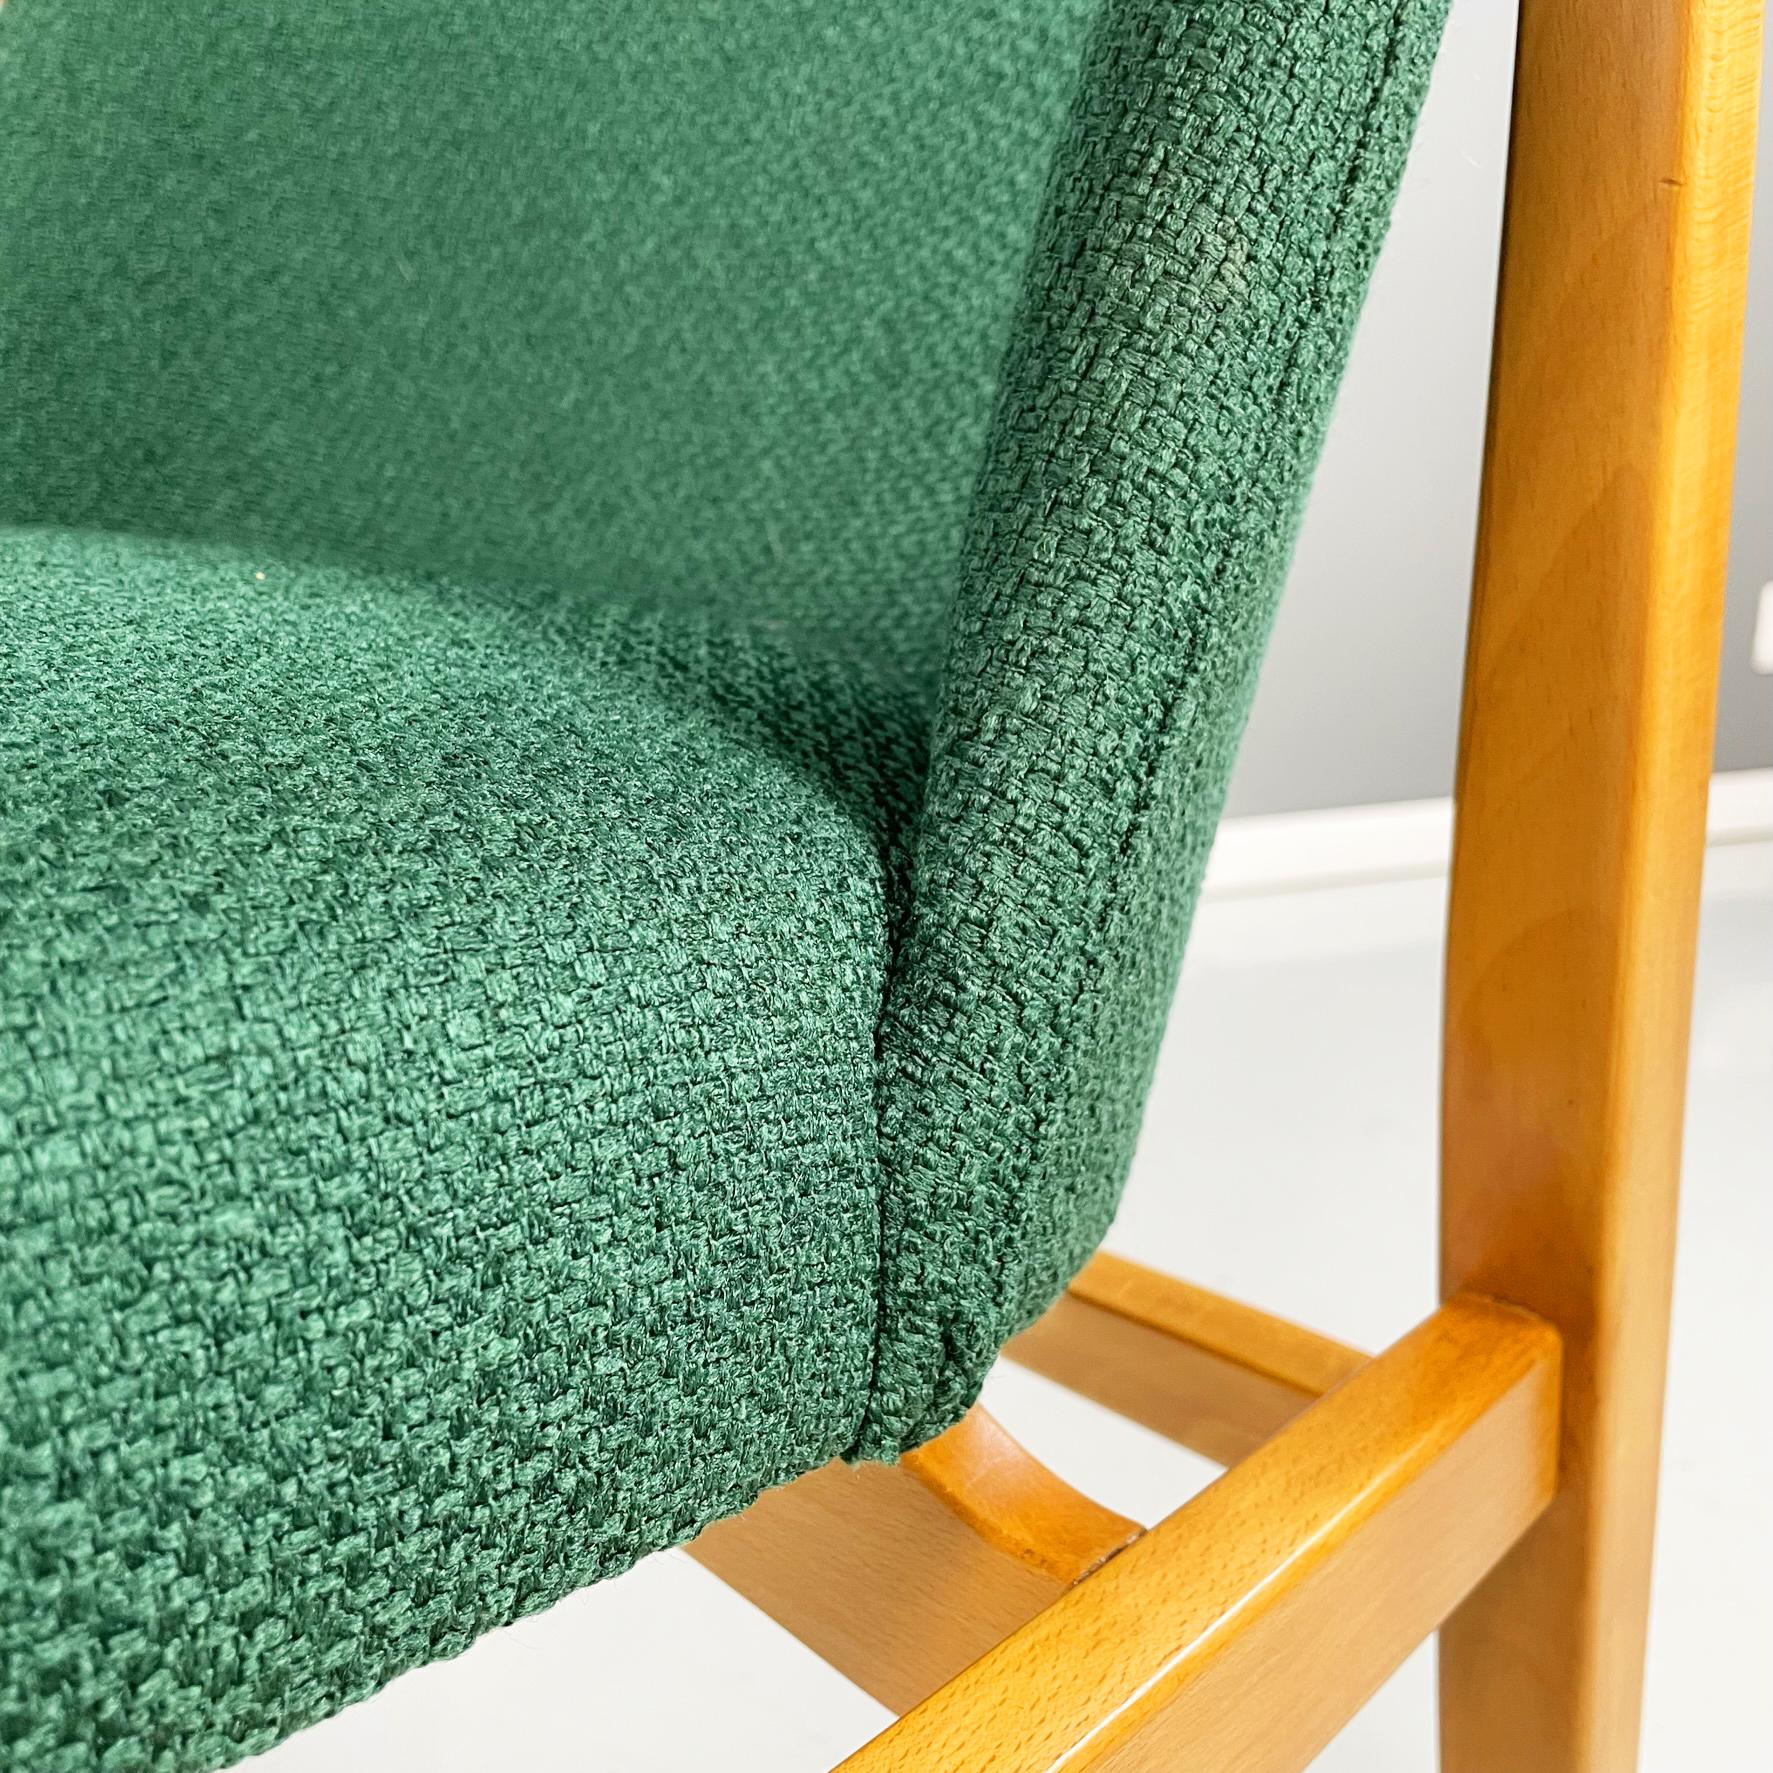 Danish Mid-Century Modern Armchairs in Forest Green Fabric and Wood, 1960s For Sale 8